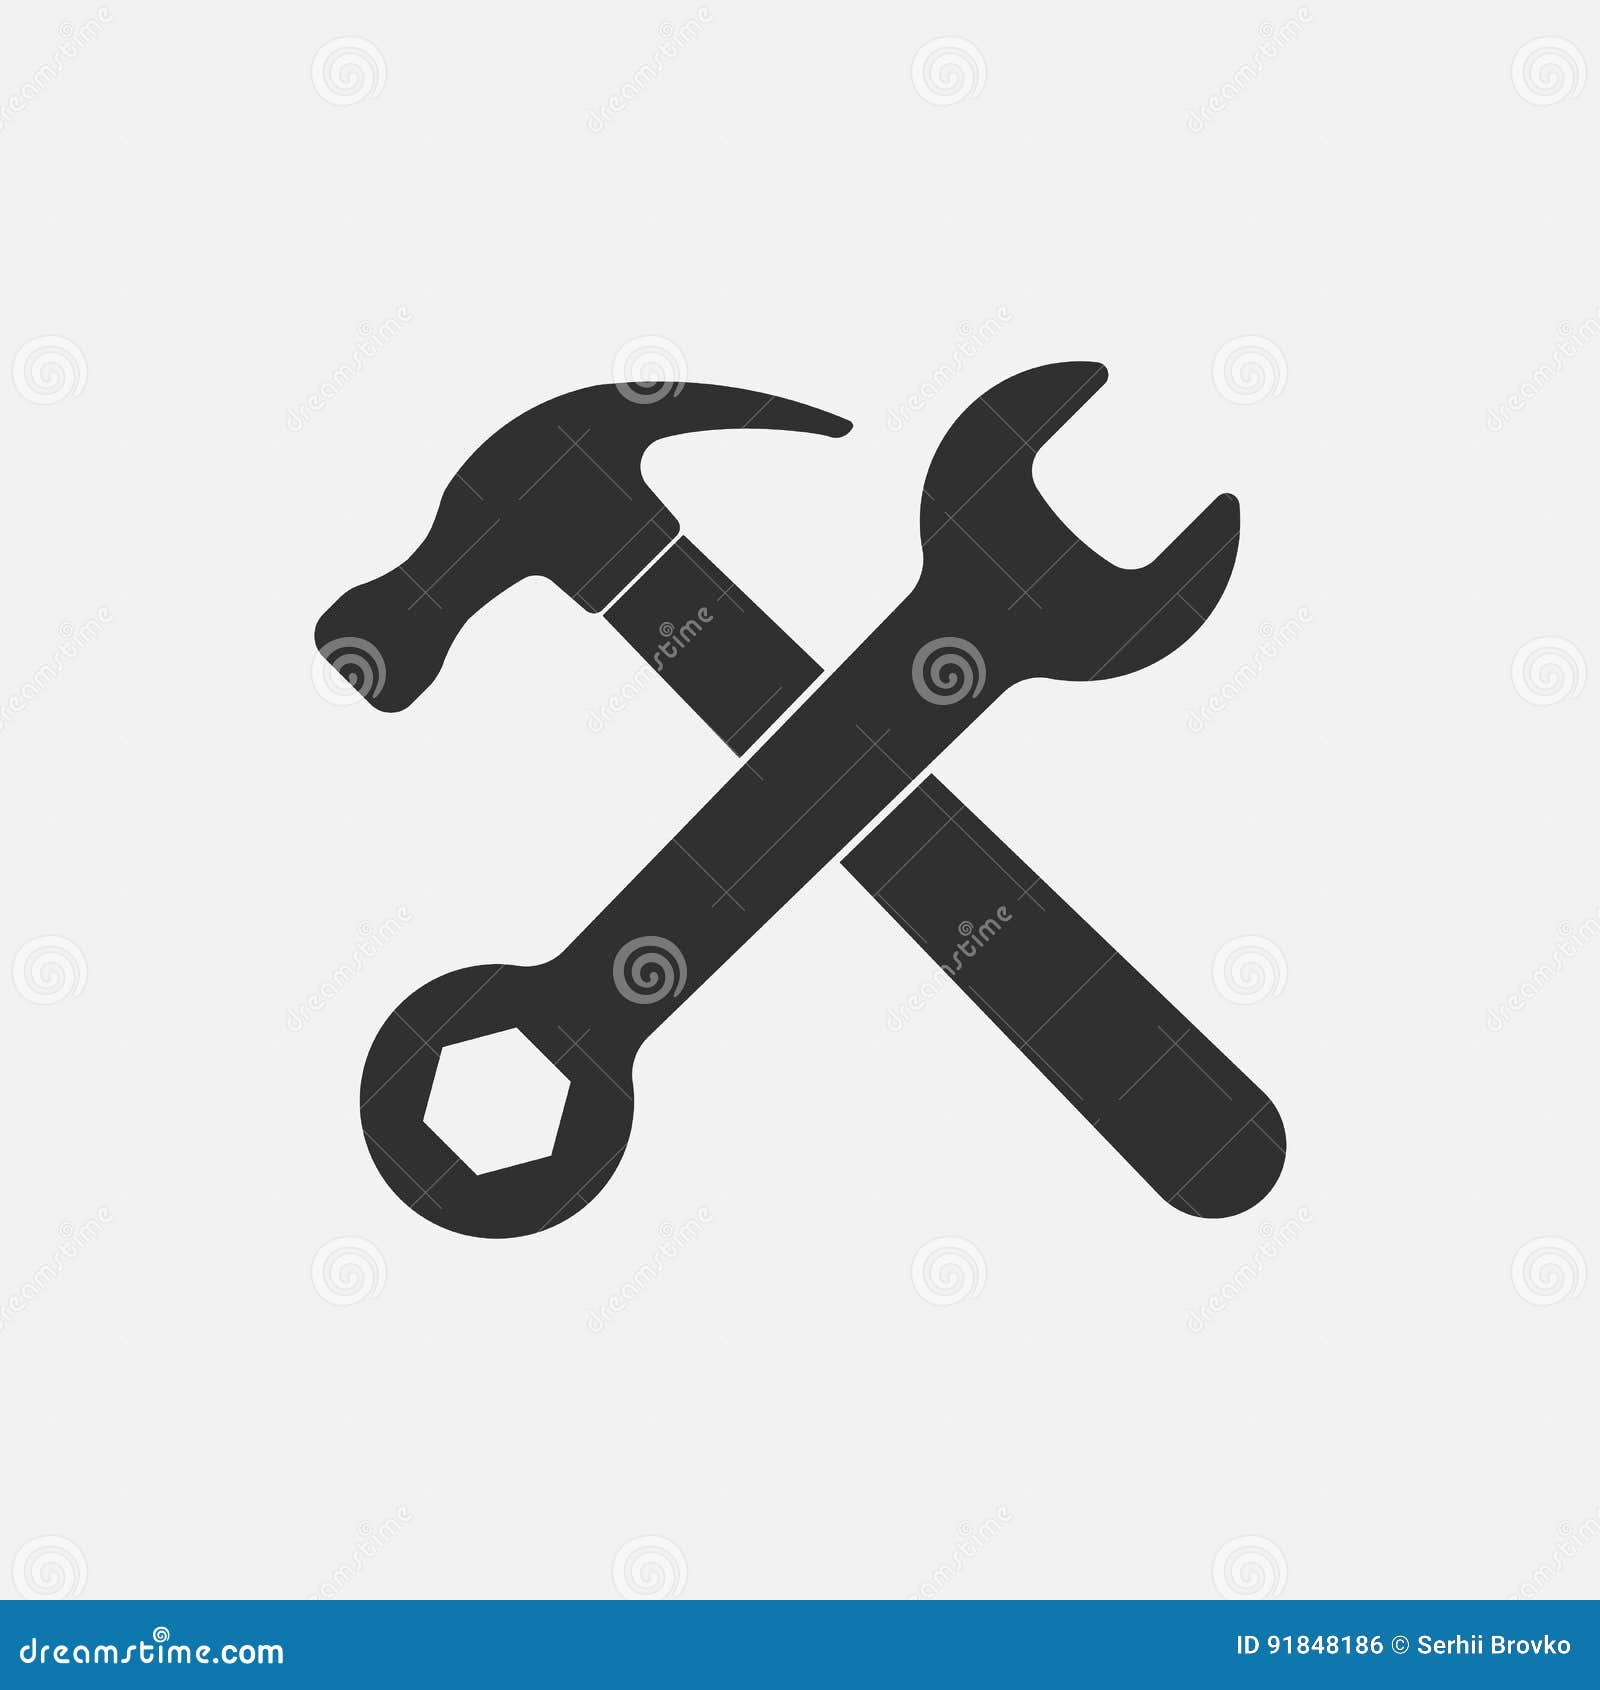 hammer and wrench icon.